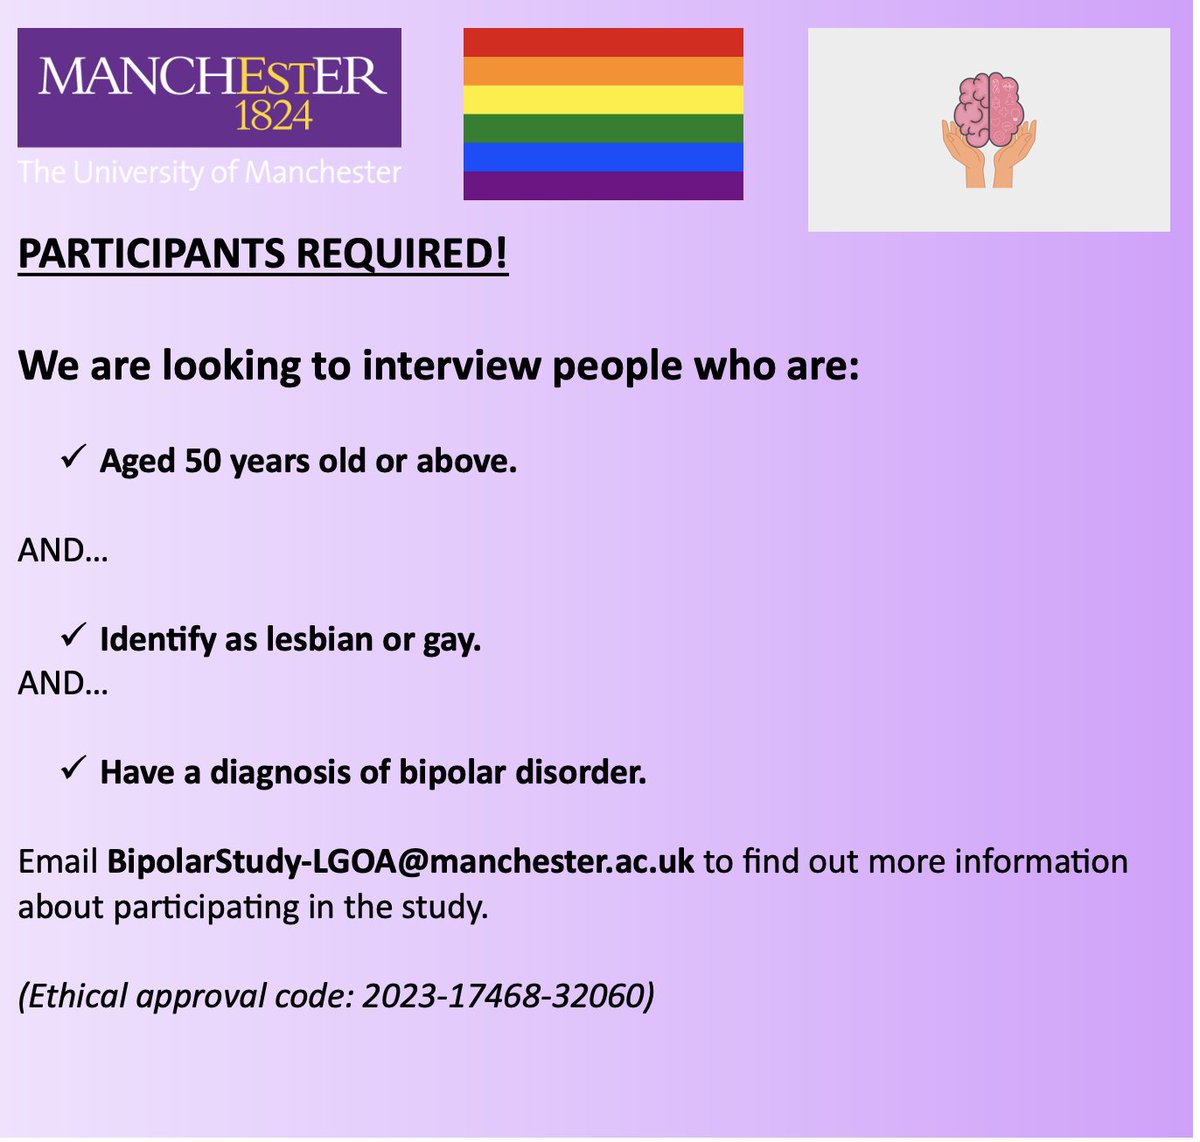 RESEARCH - Could you help? The University of Manchester are looking to interview individuals aged 50 years old and above with a diagnosis of bipolar disorder and who identify as cisgender and lesbian or gay. Email BipolarStudy-LGOA@manchester.ac.uk to find out more.